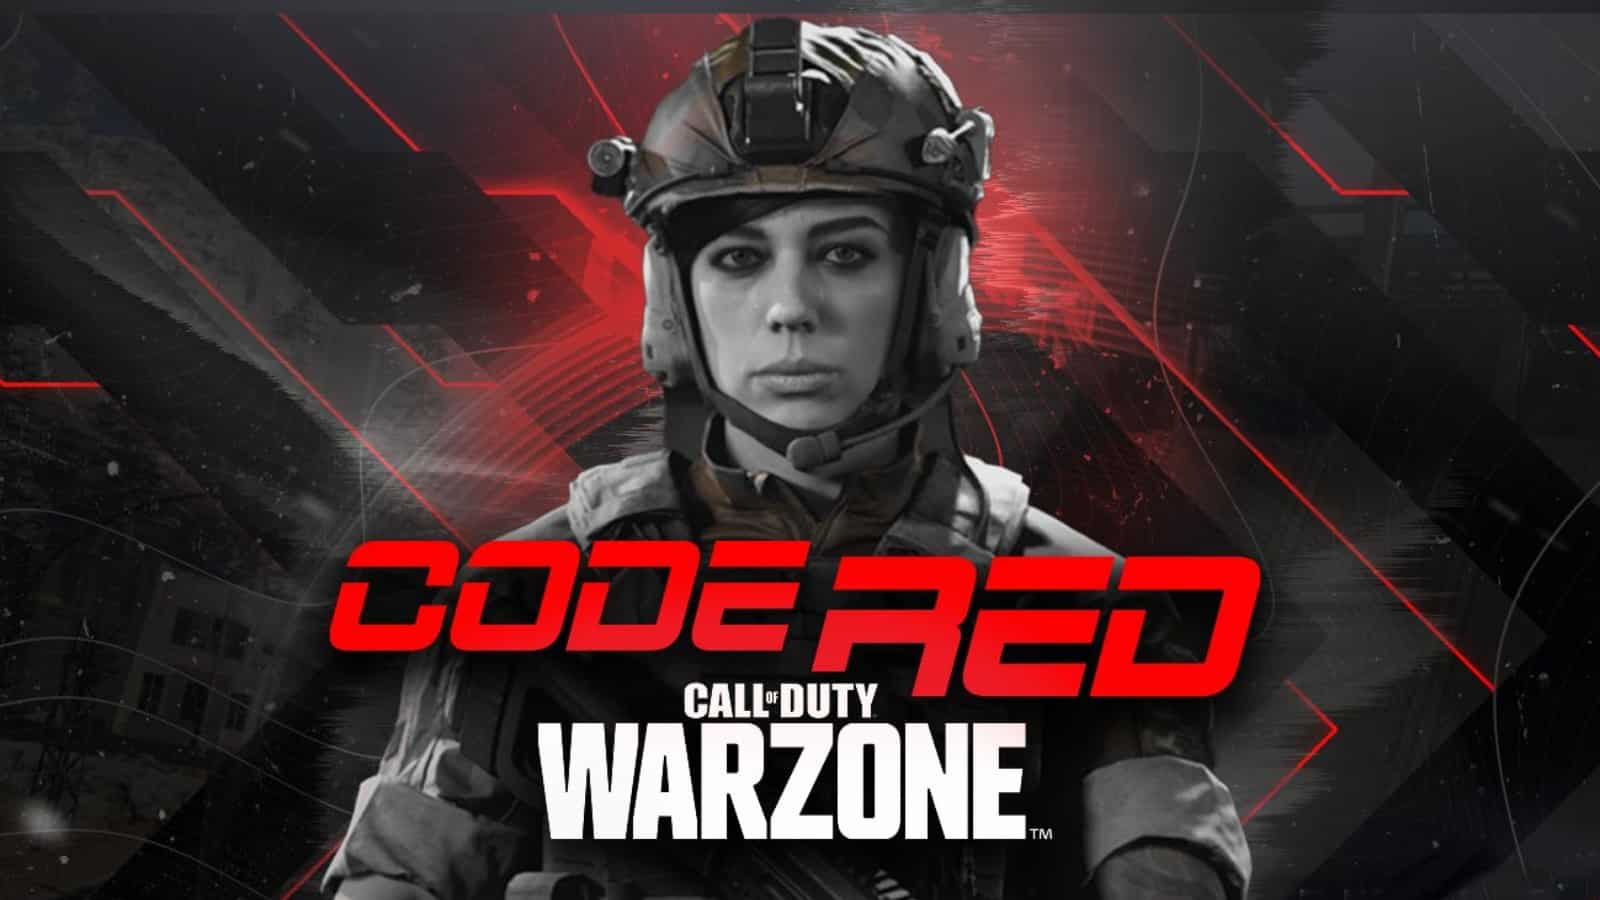 Code Red Warzone tournament